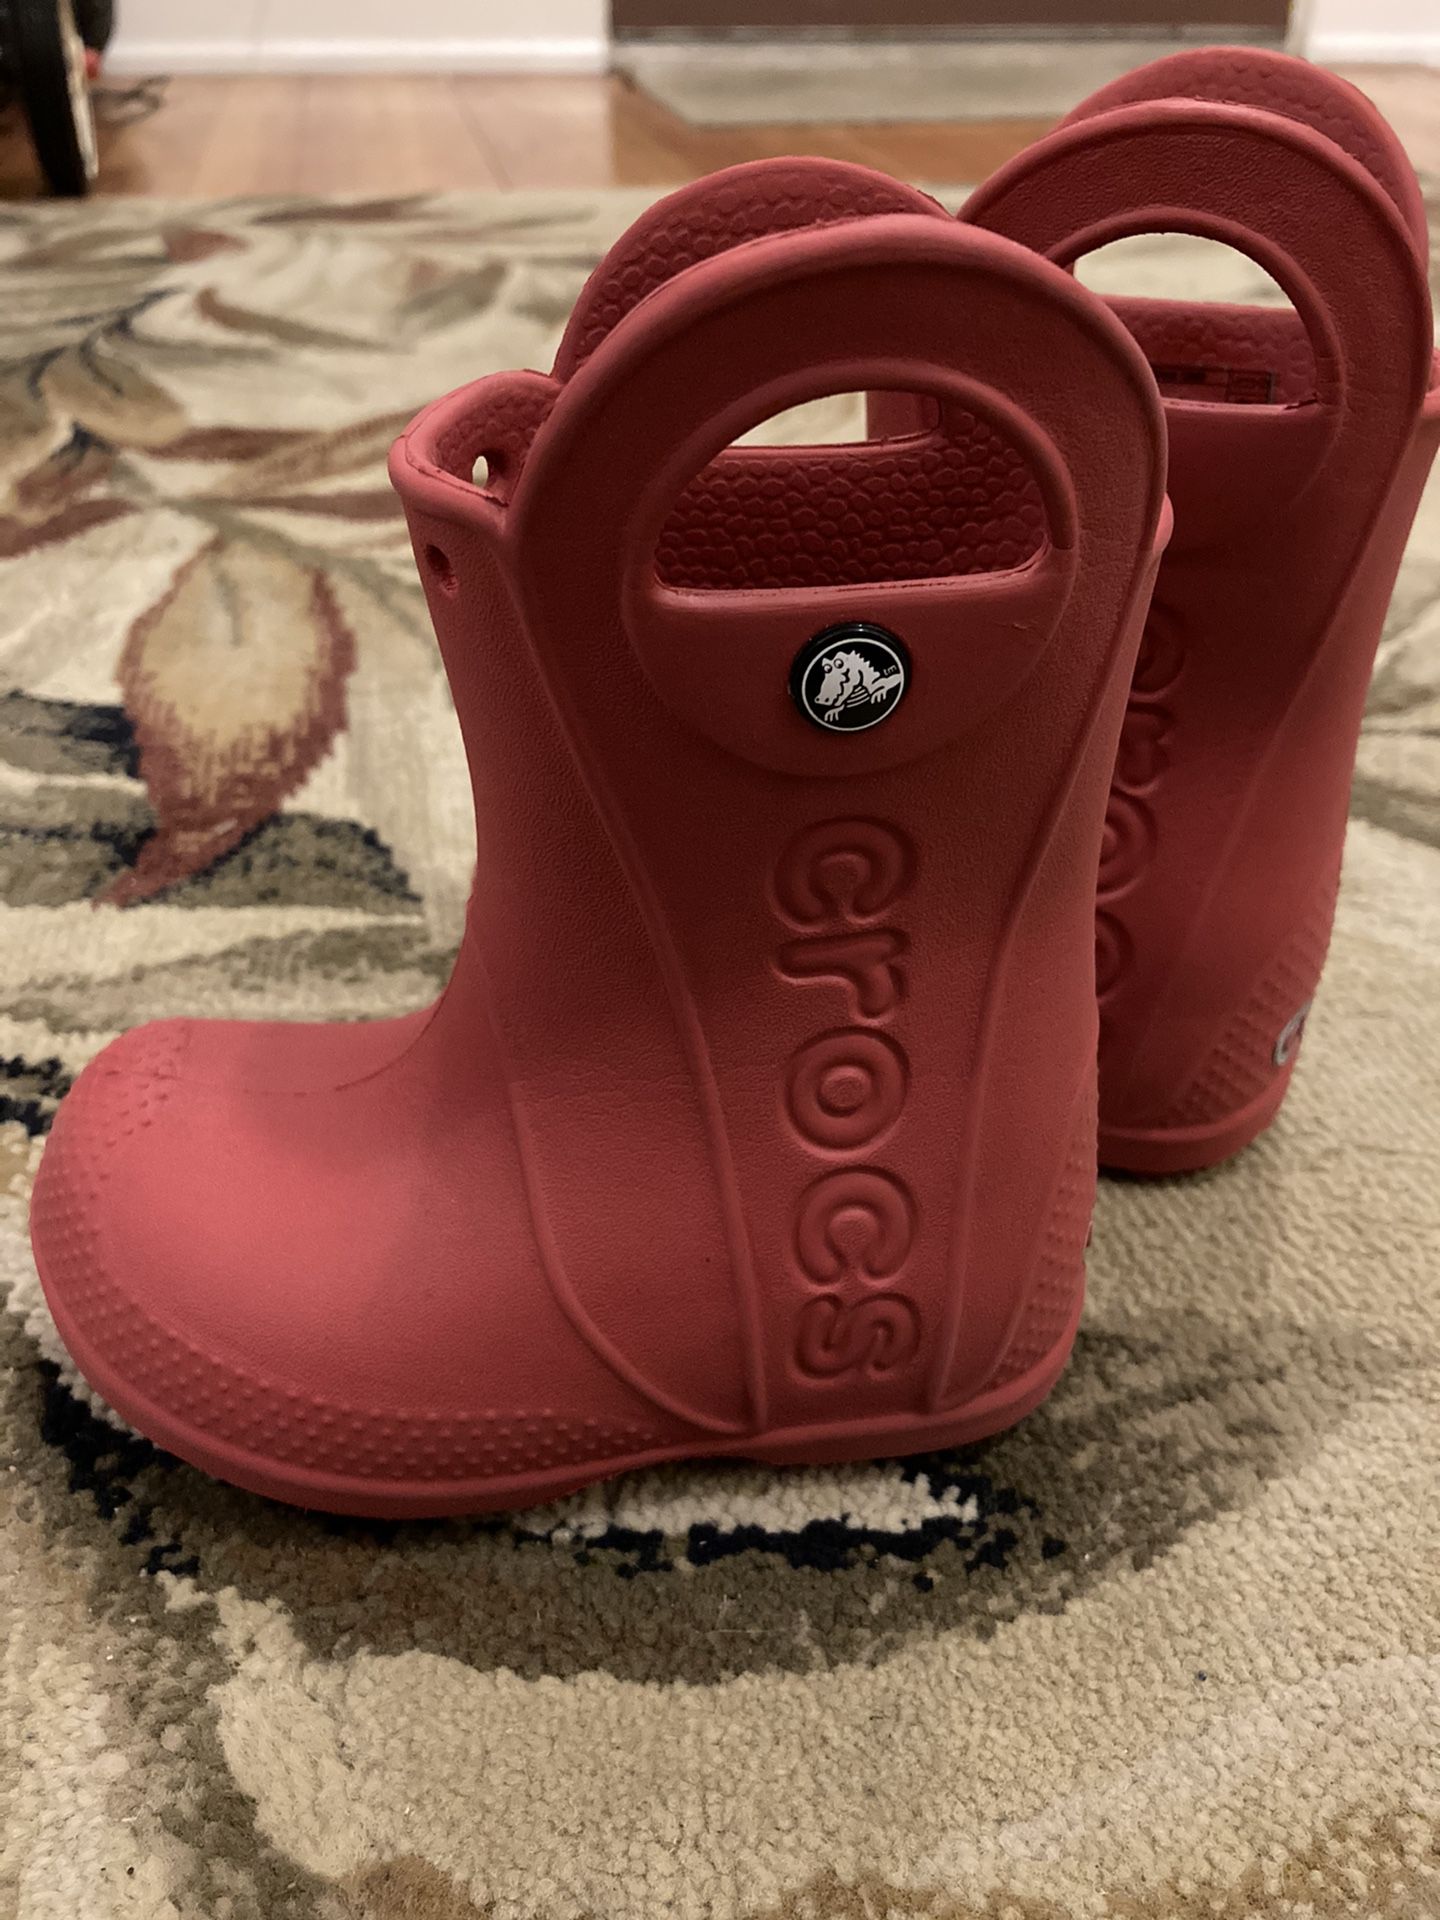 Rain boots Toddler Size 7